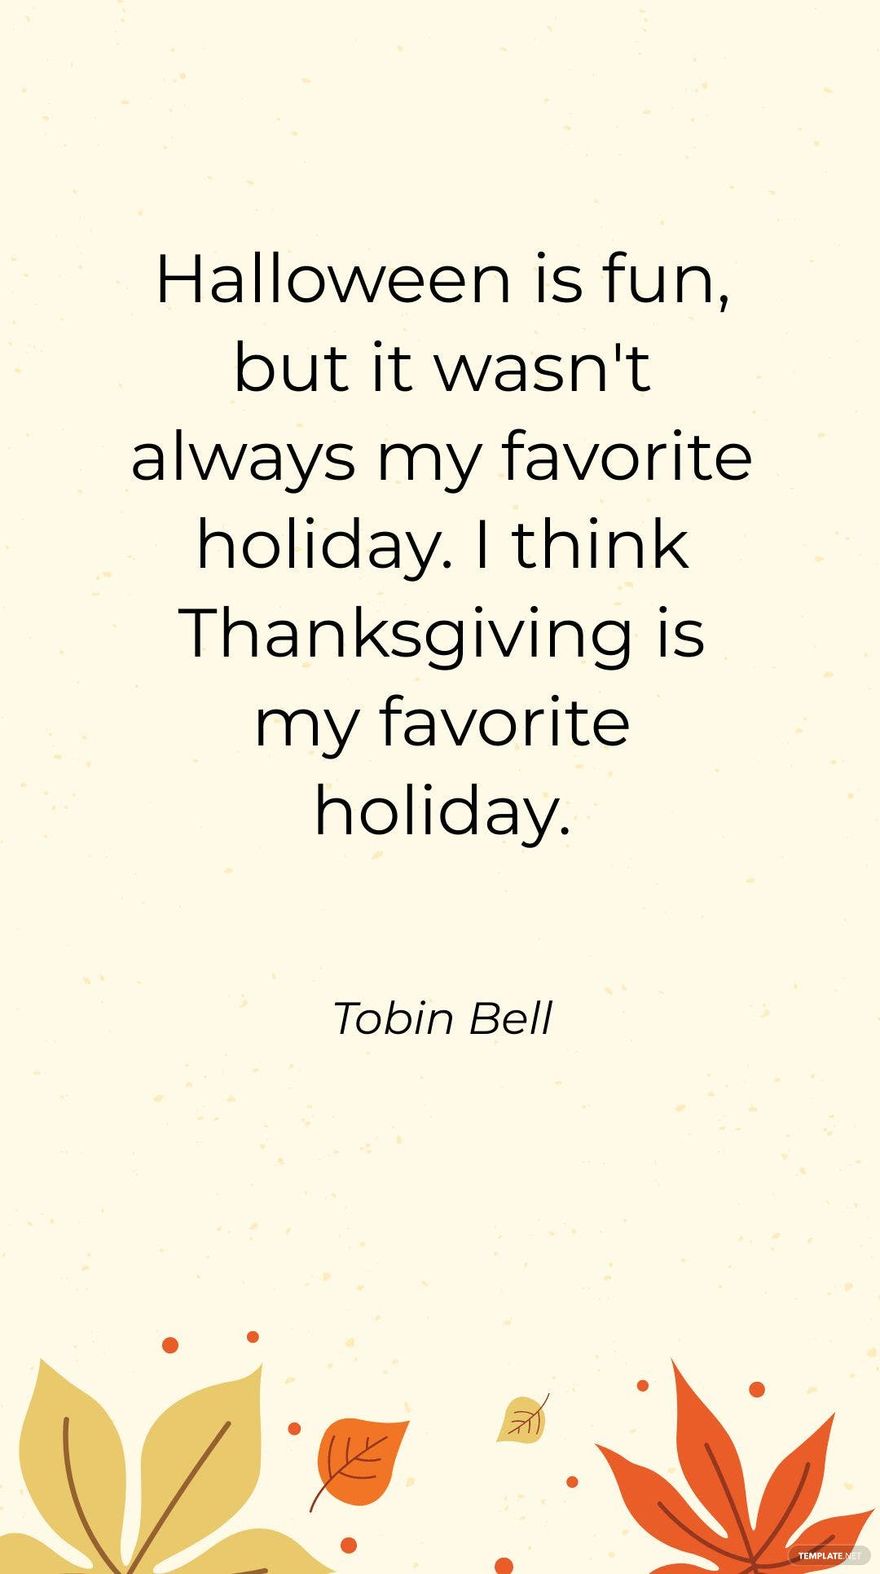 Free Tobin Bell - Halloween is fun, but it wasn't always my favorite holiday. I think Thanksgiving is my favorite holiday. in JPG